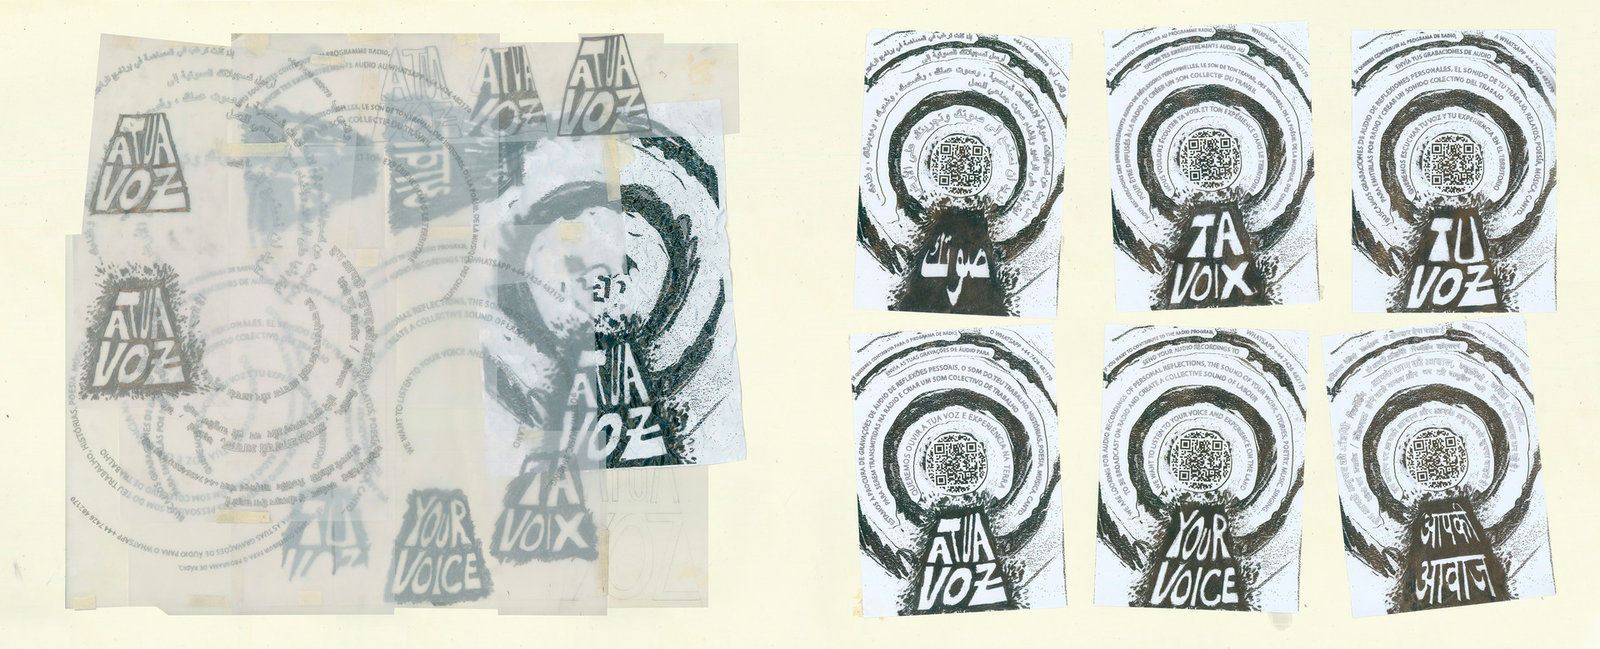 A tua voz – A series of flyers used for a open call of audio recordings to be used in the project's radio broadcast and archive 